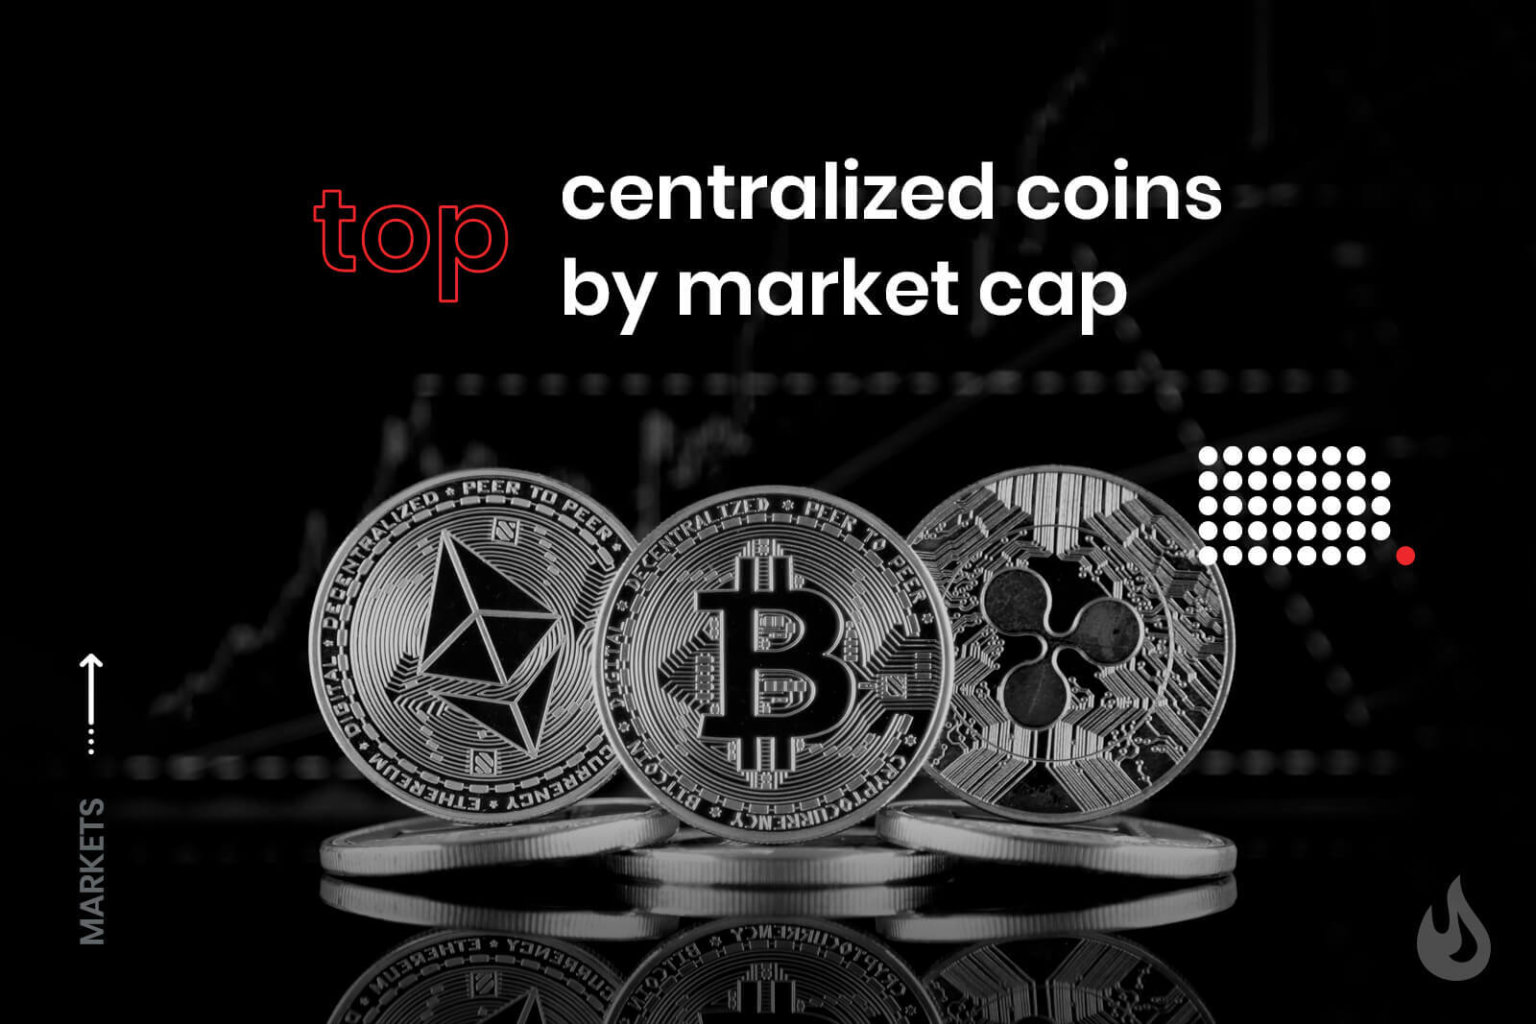 top-centralized-coins-by-market-cap-dailycoin